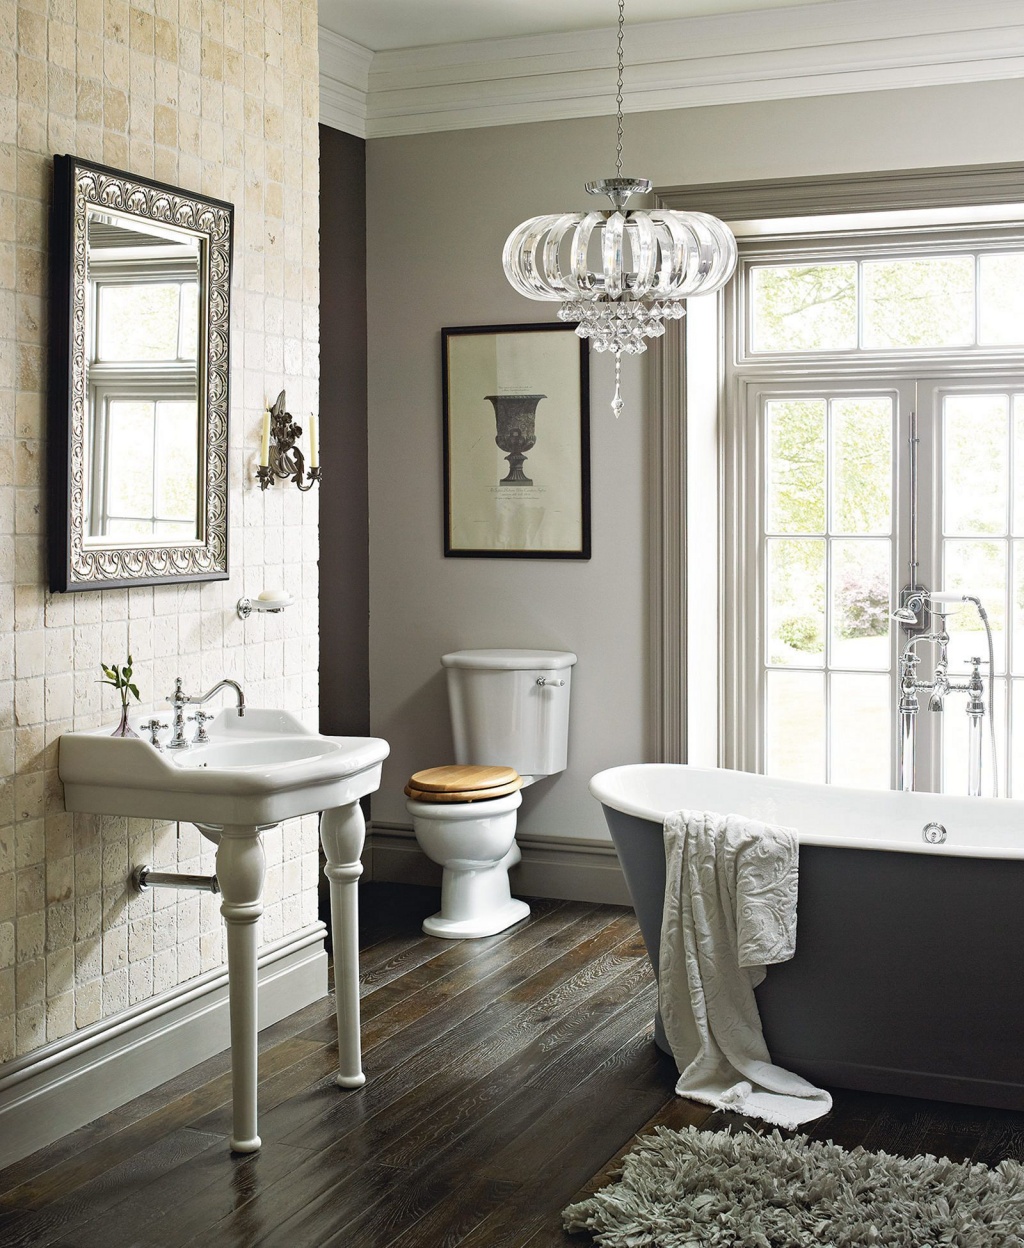 Graceful French country house bathroom